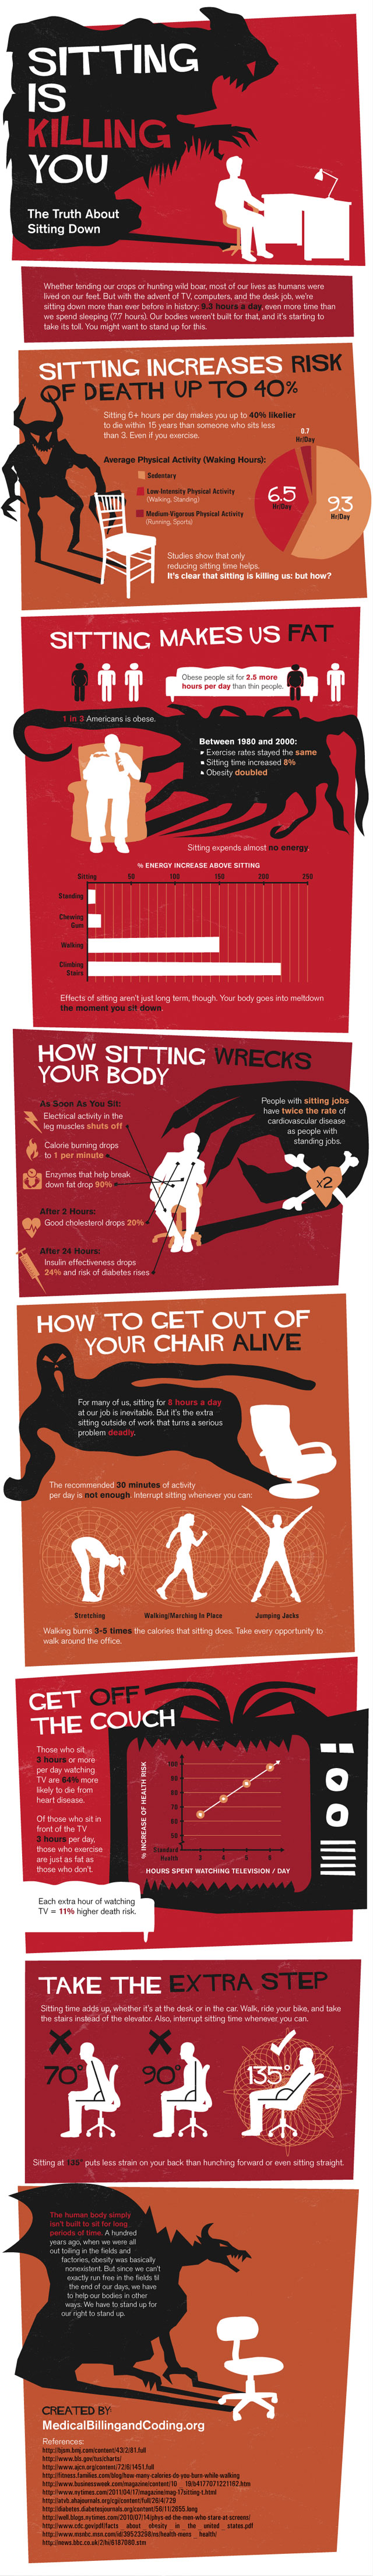 sitting-is-killing-you-infographic